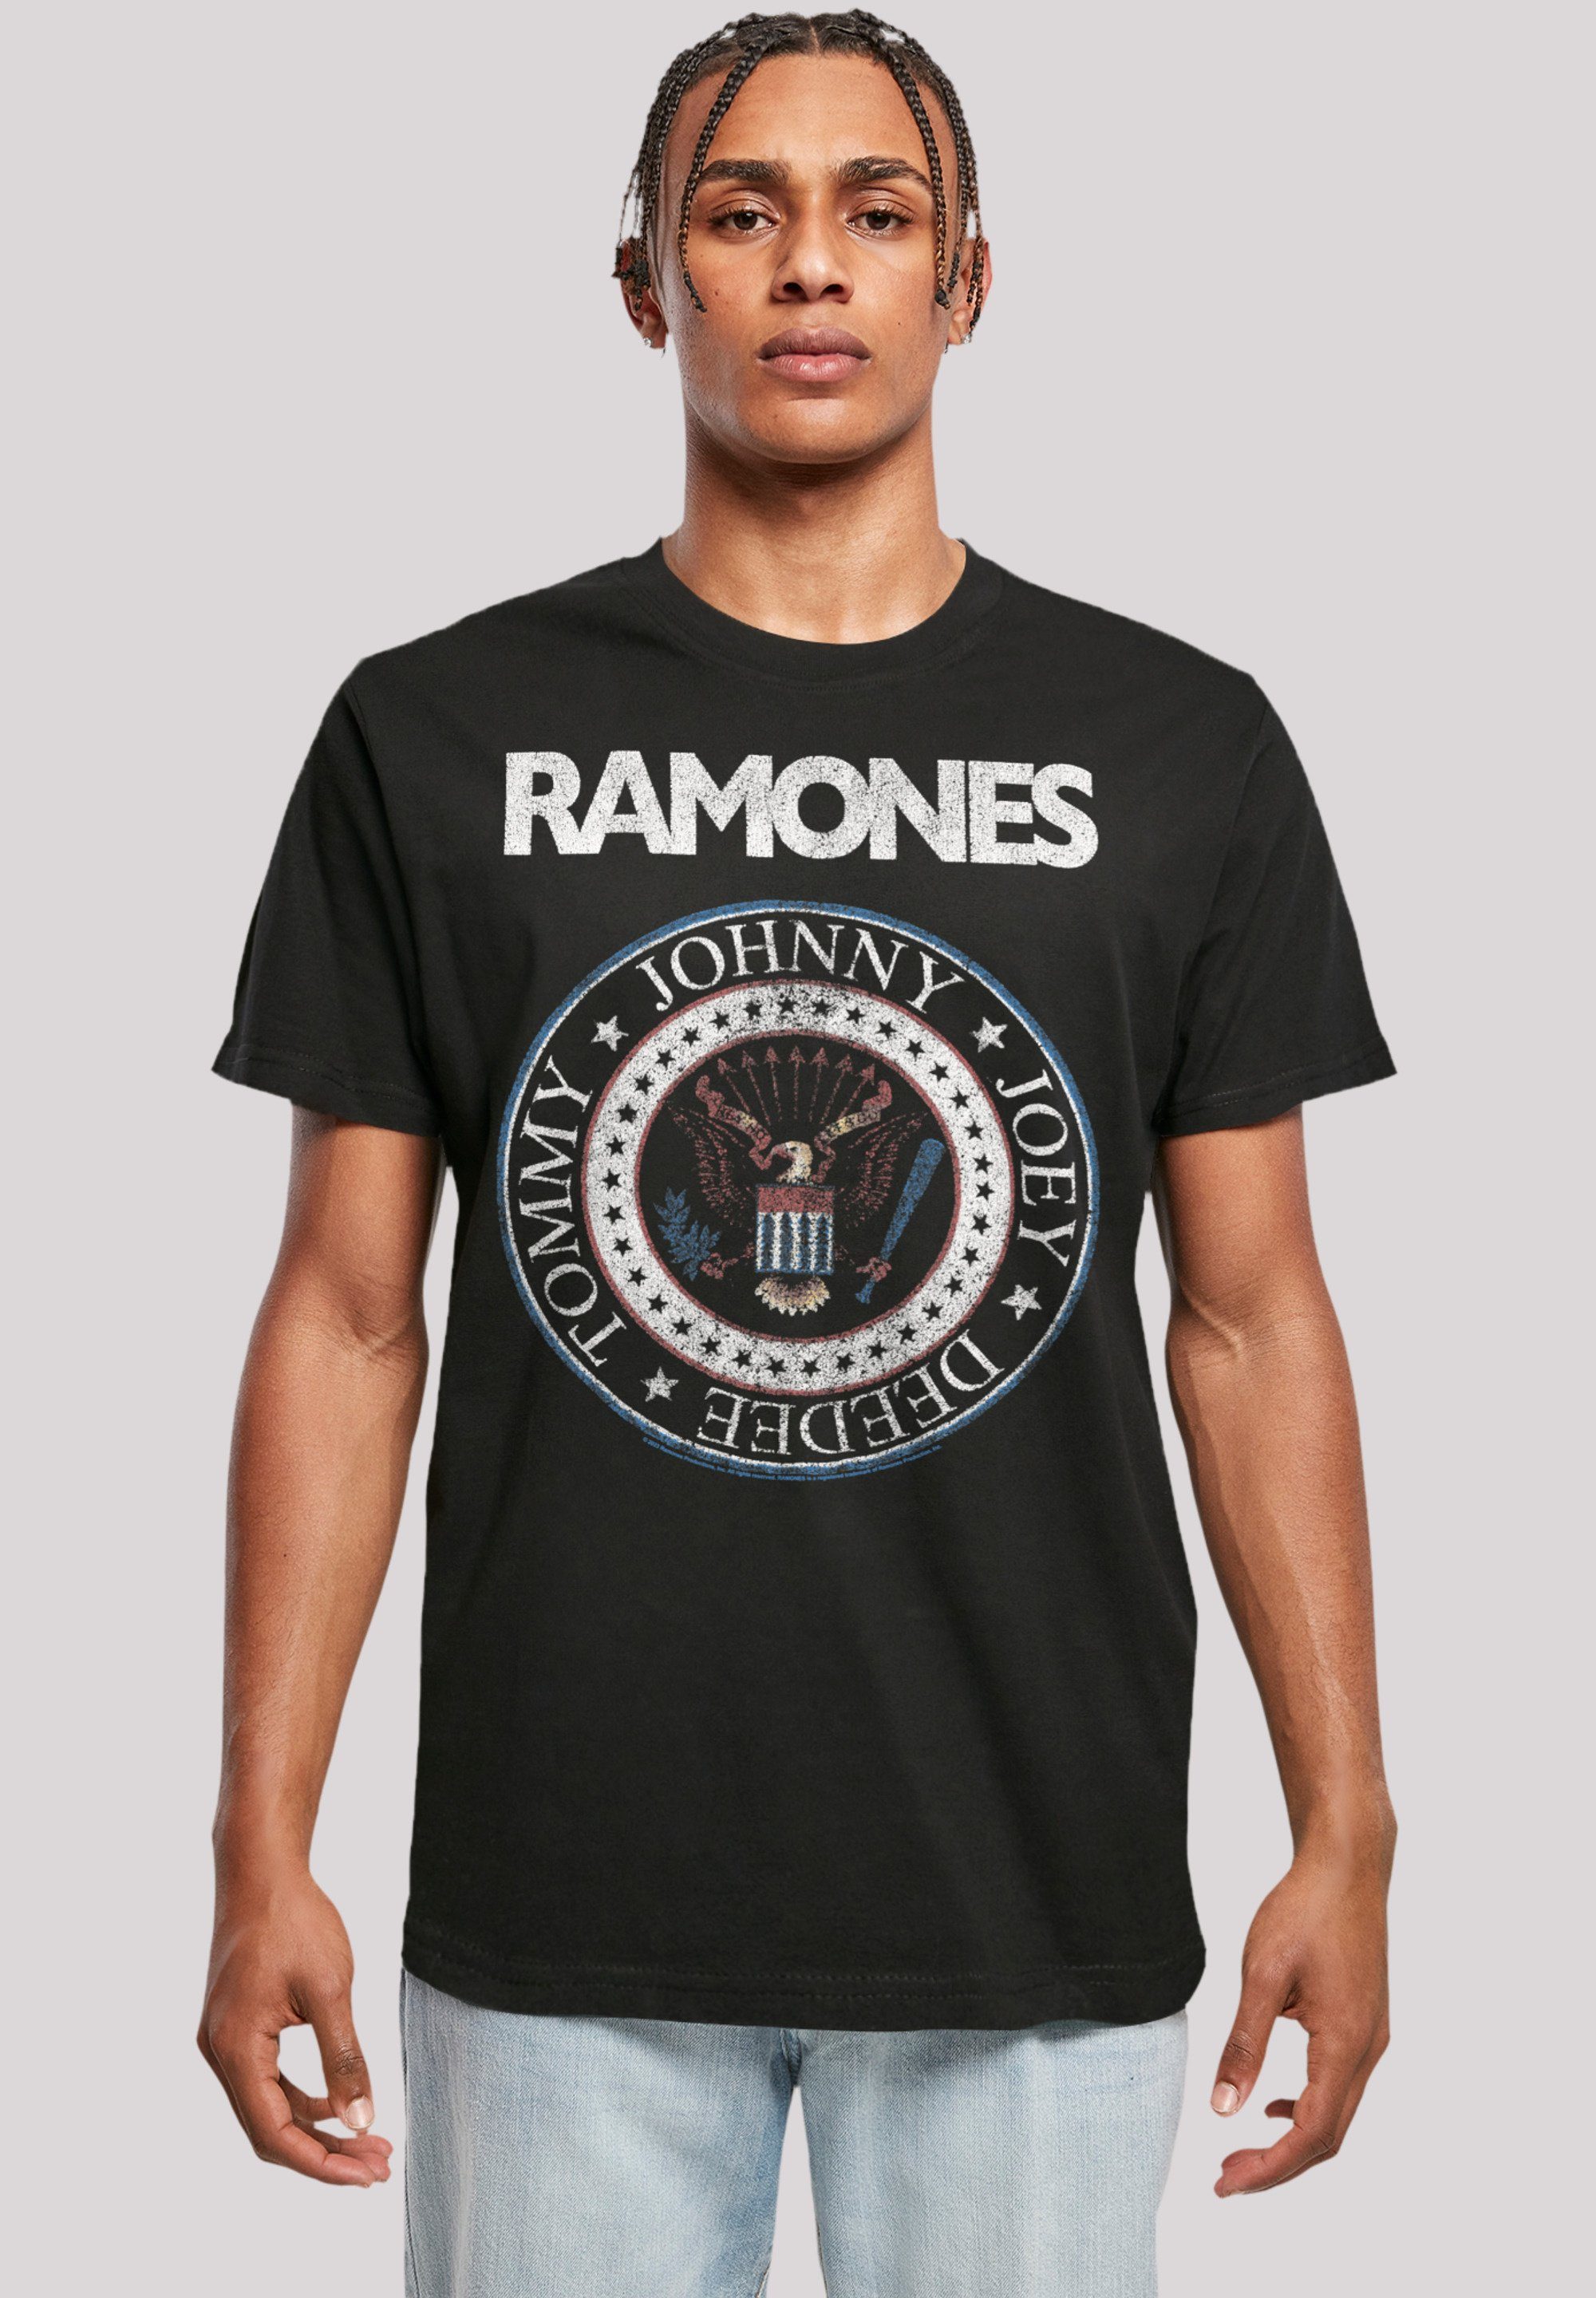 F4NT4STIC T-Shirt Ramones Rock Musik Band Red White And Seal Premium Qualität, Band, Rock-Musik